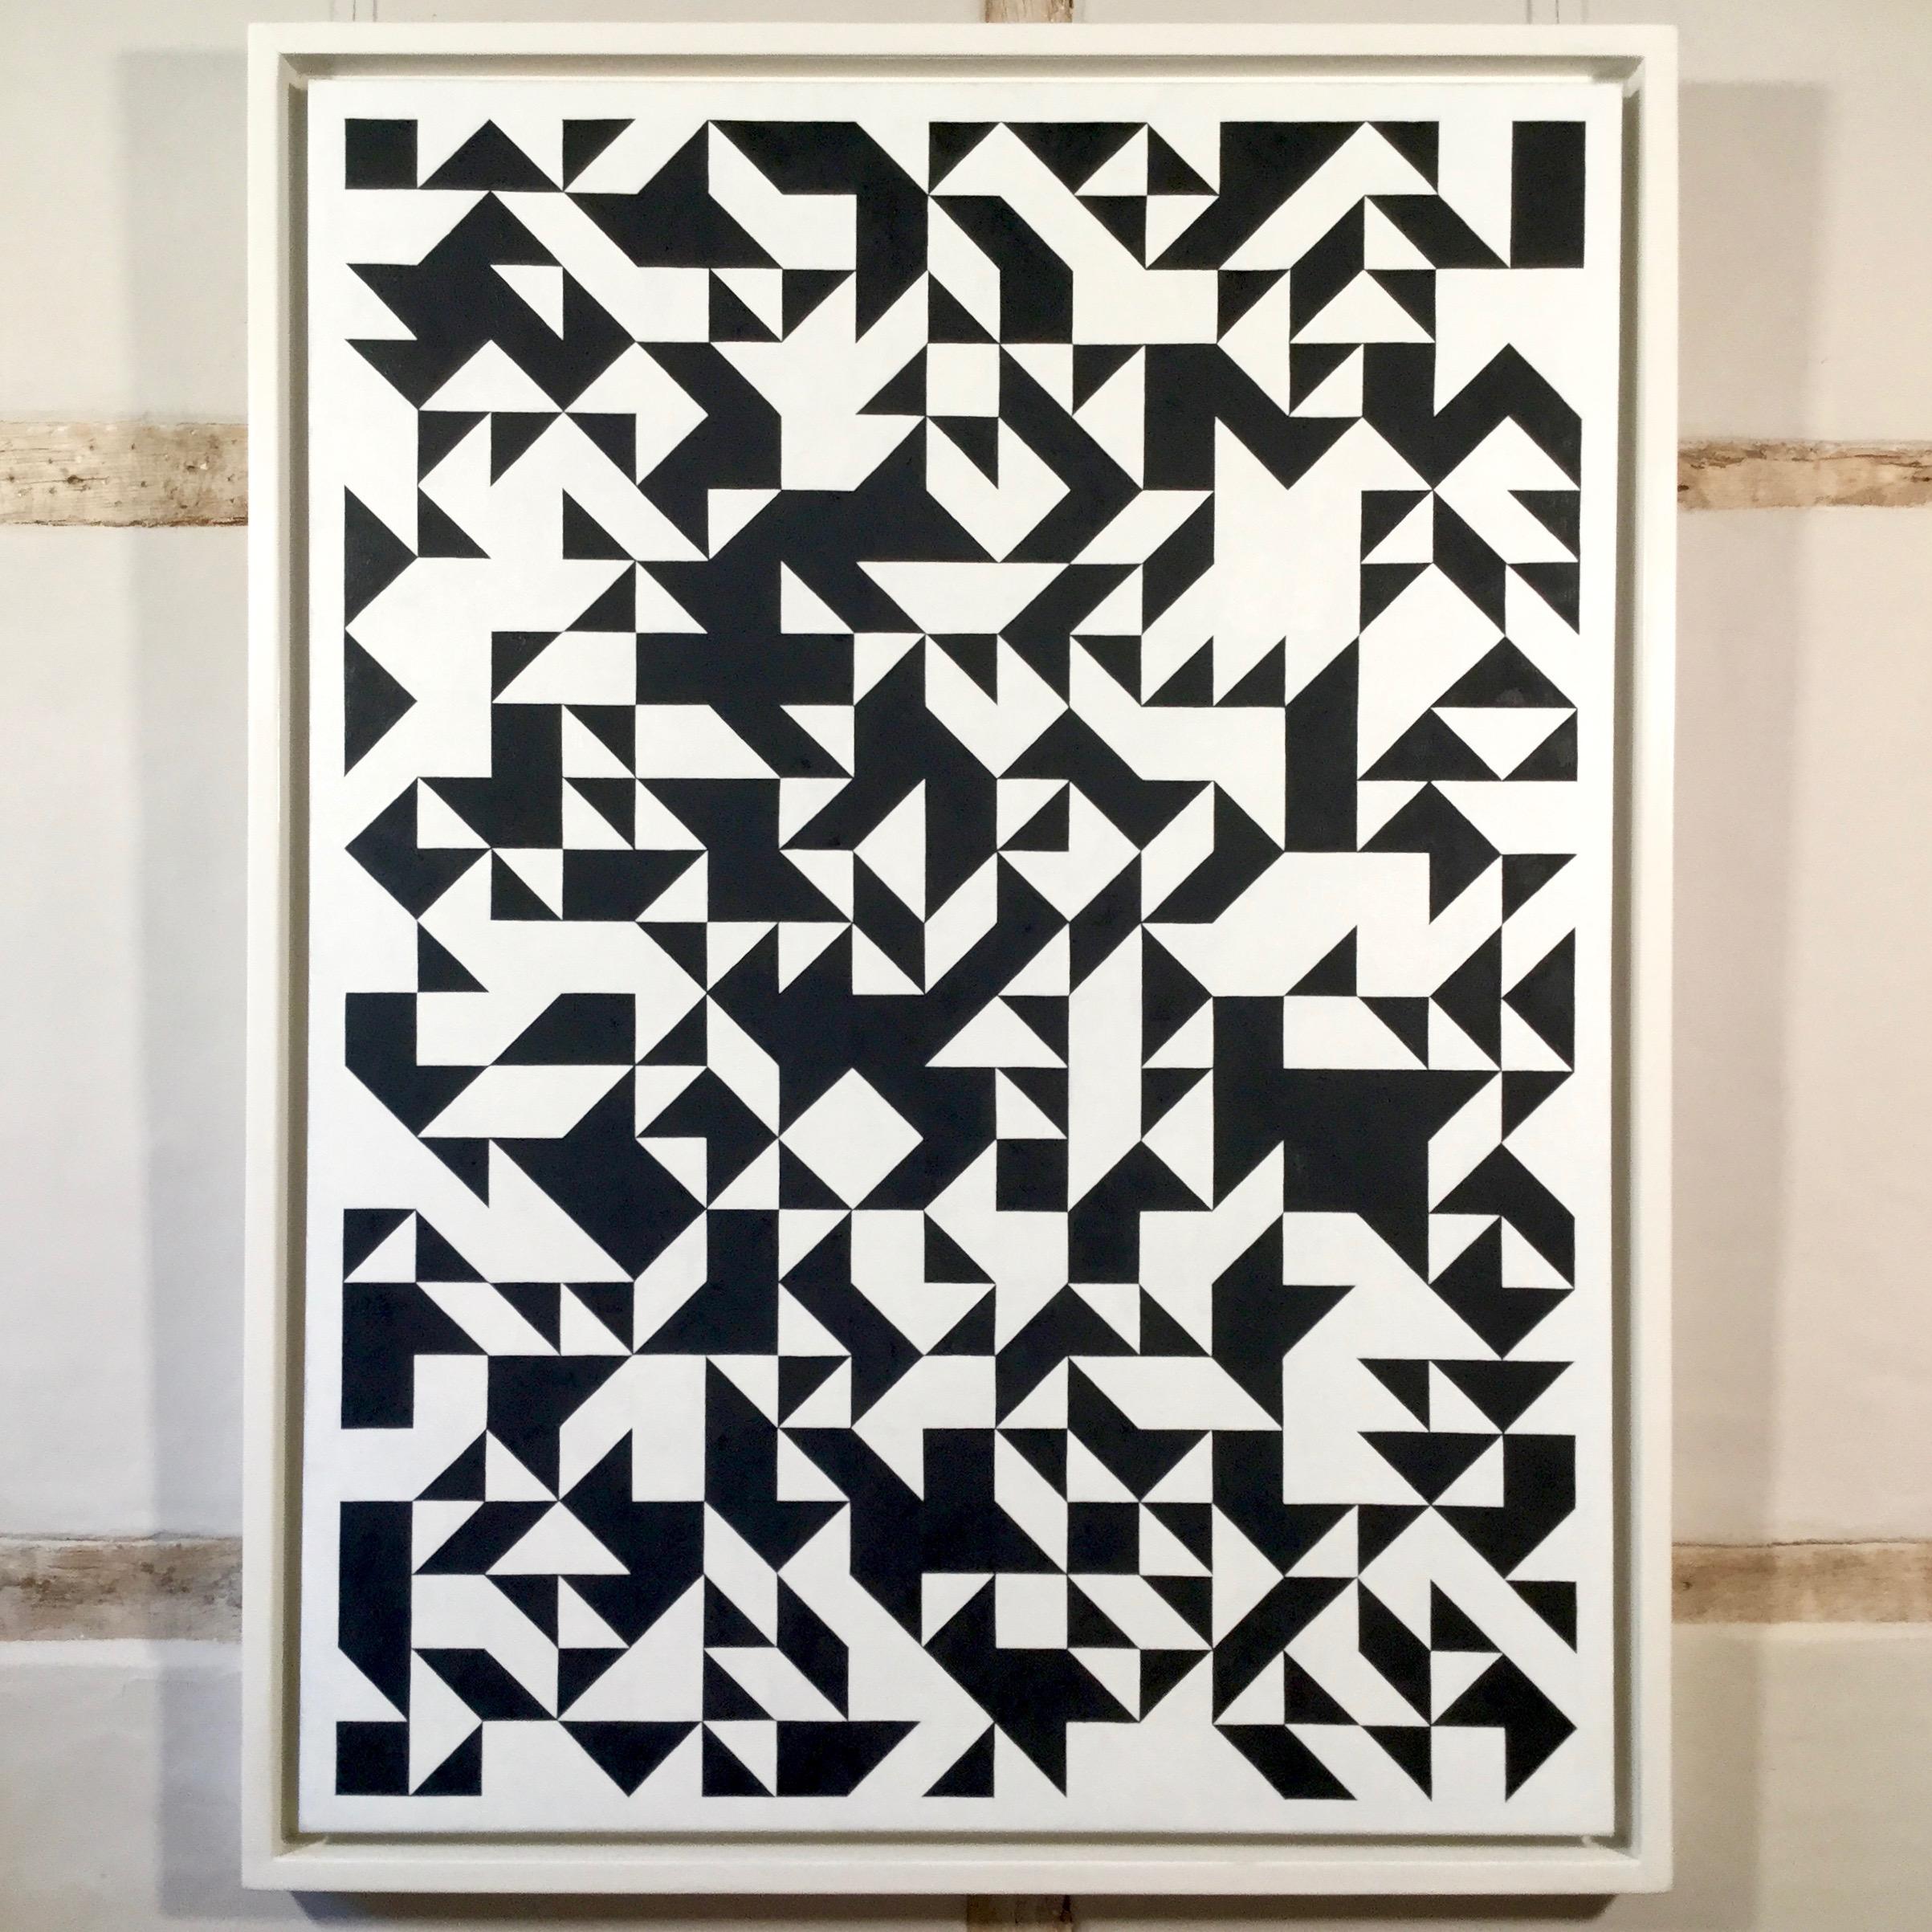 Black and White - large oil painting, abstract, constructivist, geometric - Painting by Jon Probert